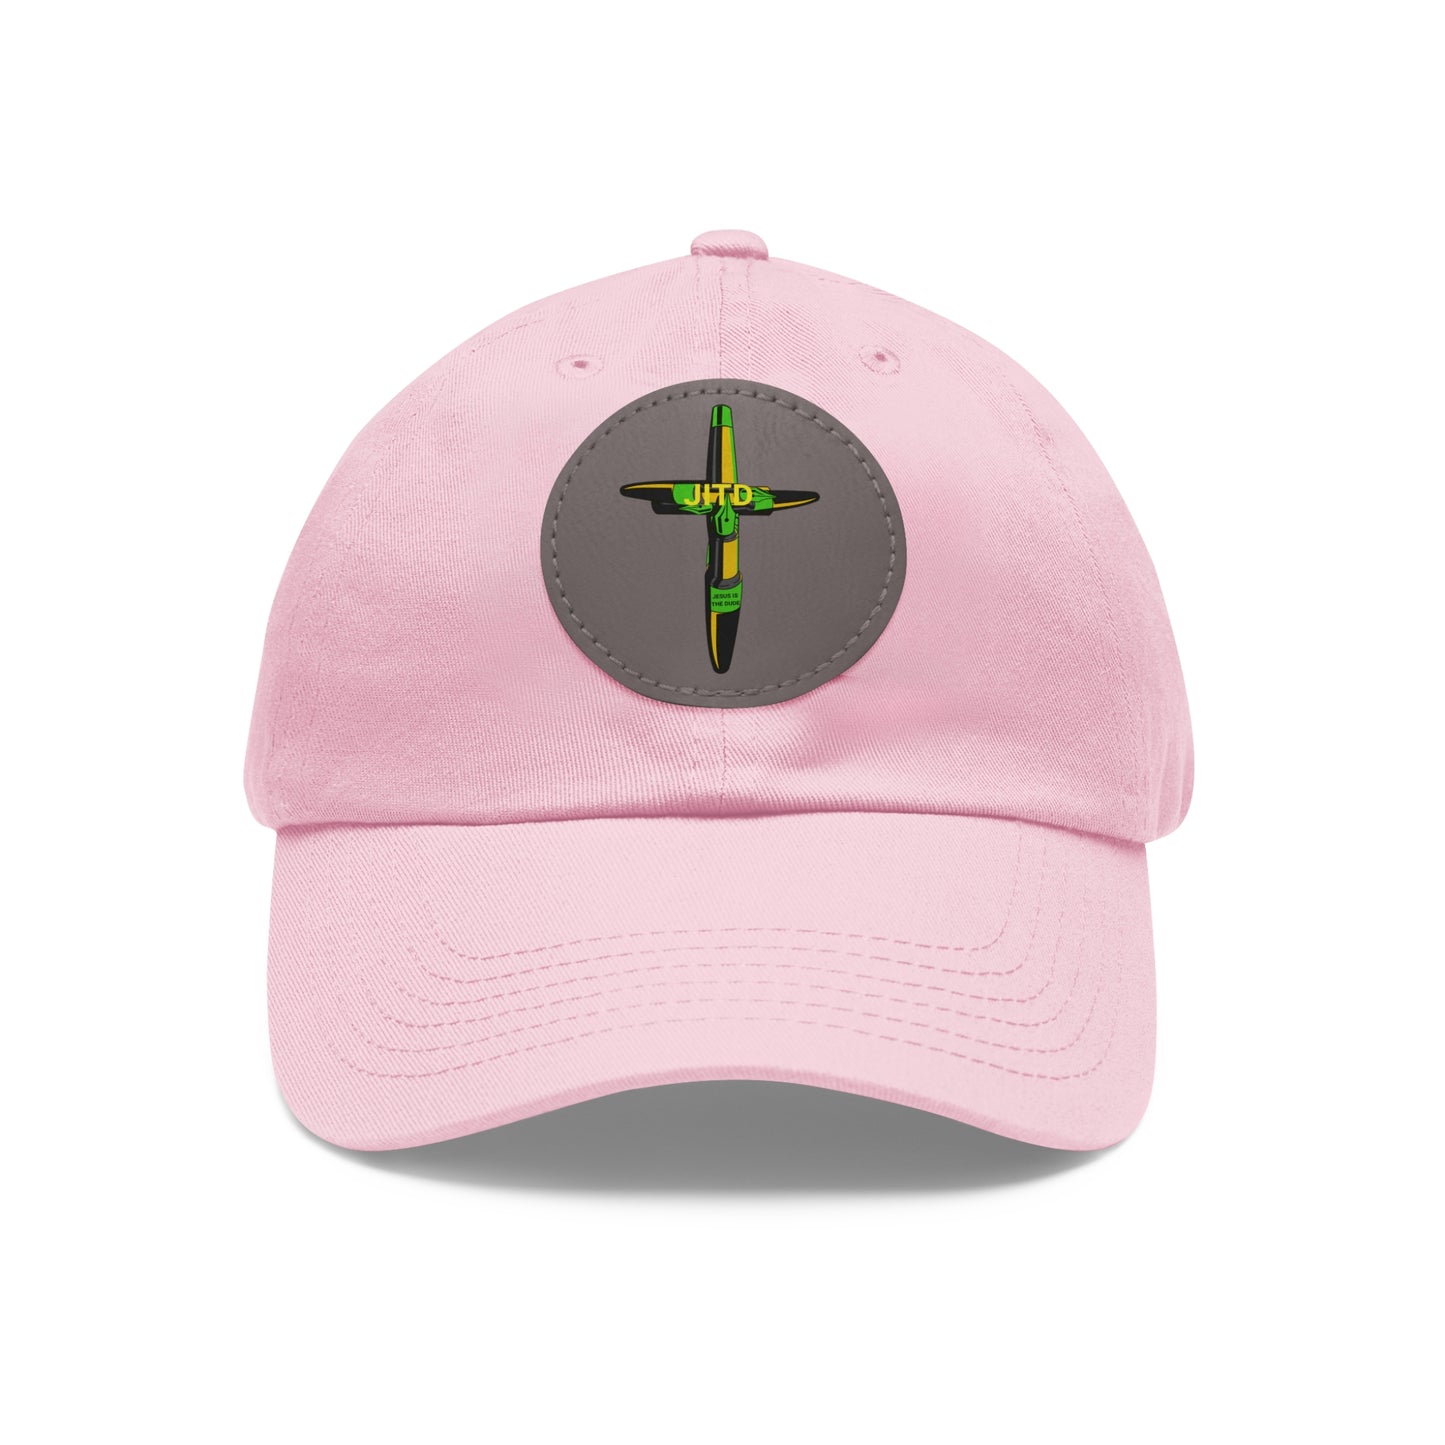 JITD PEN CROSS HAT WITH LEATHER PATCH